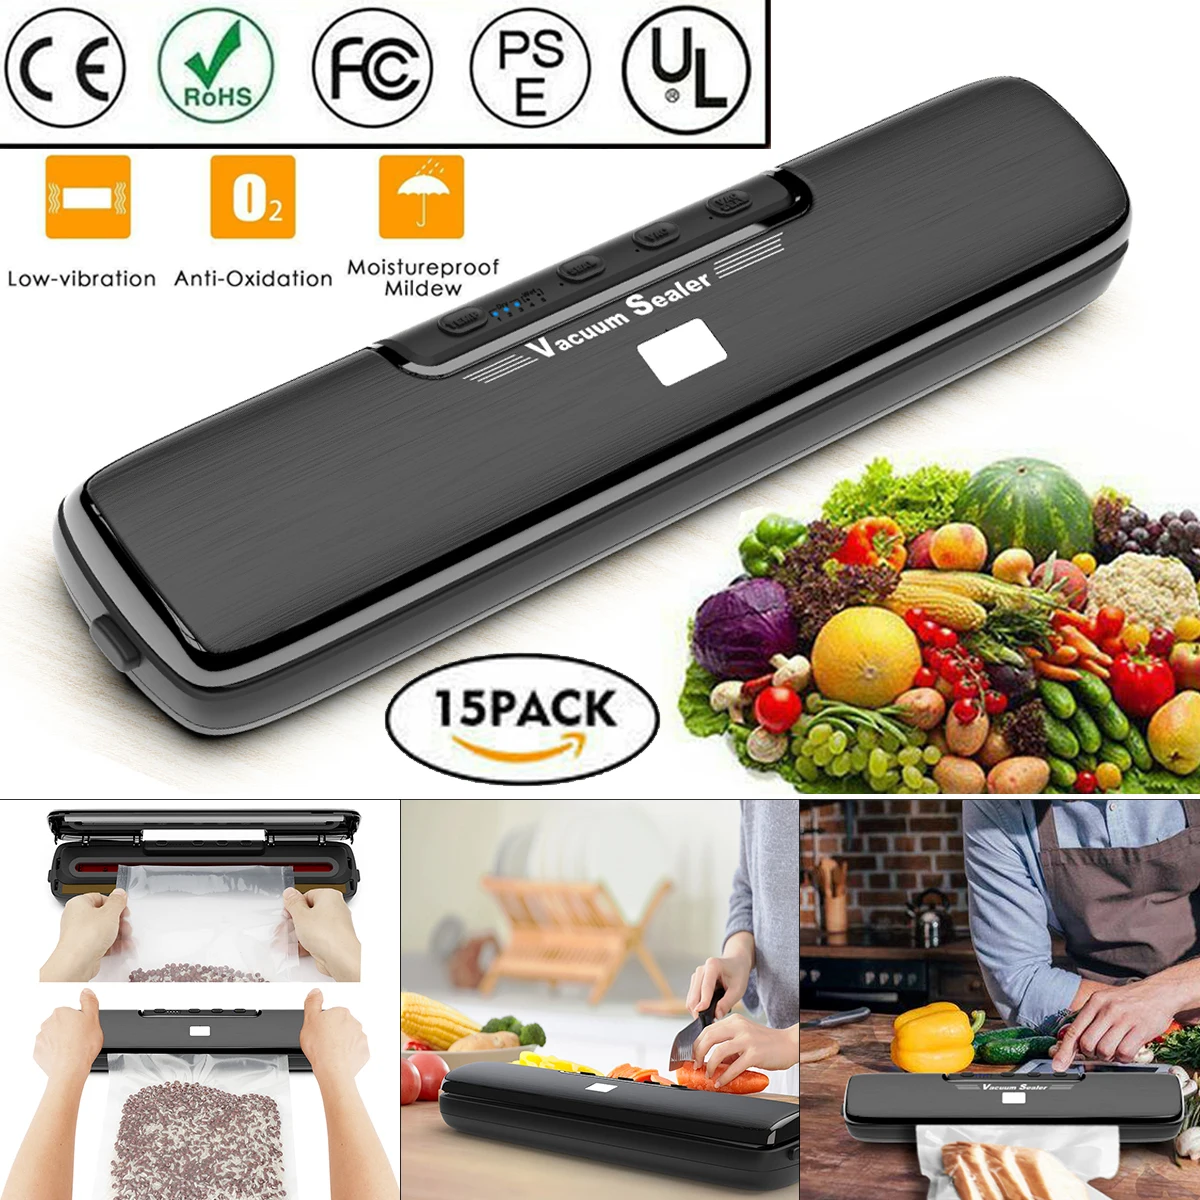 

Compact Portable mini Vacuum Sealer Machine with Five Food Preservation Modes for Food Saver Preservation